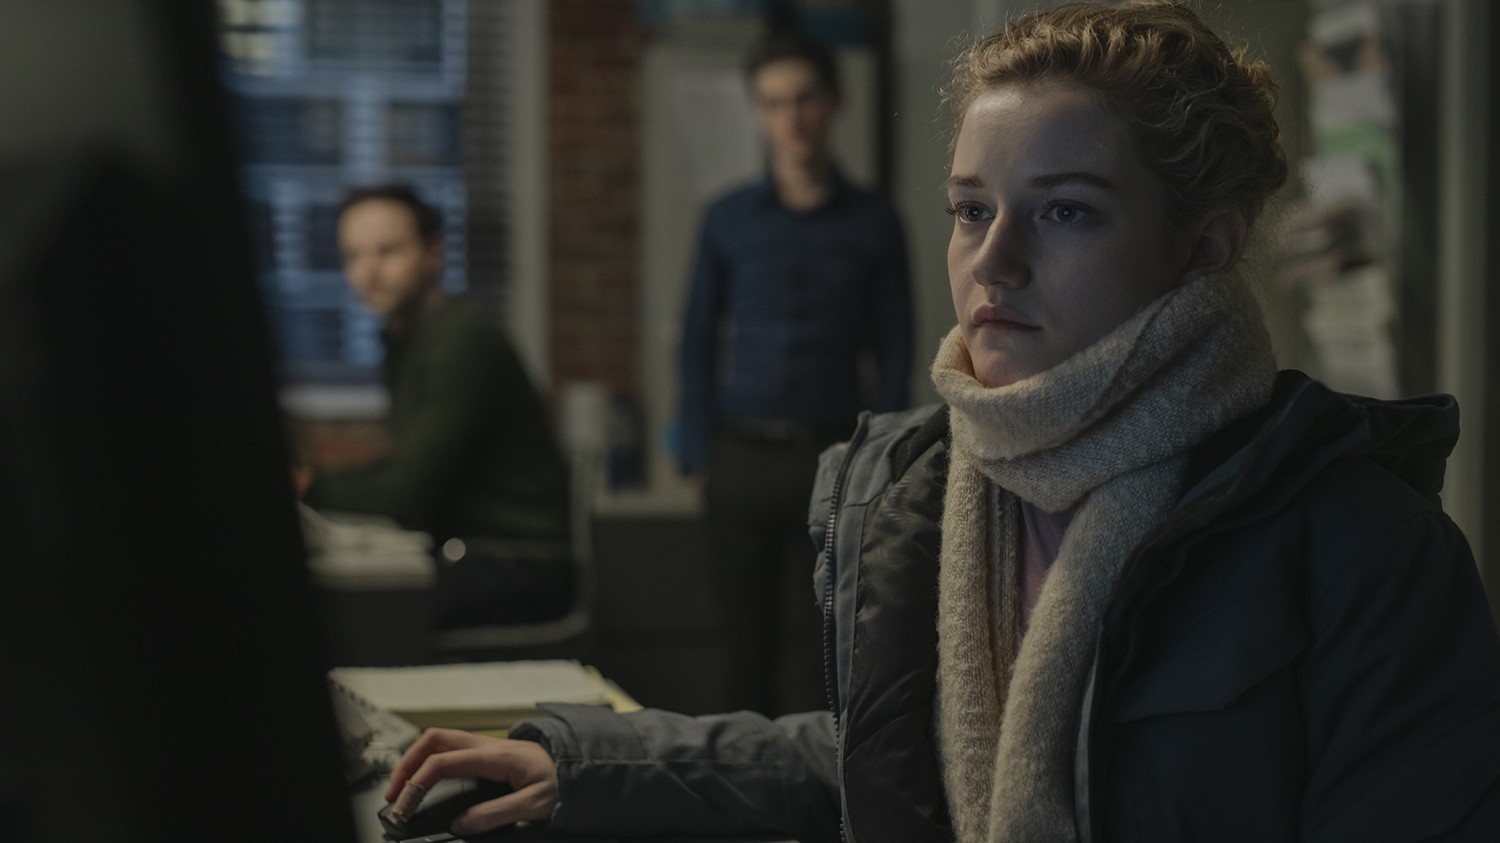 A woman wearing a white scarf sits in front of a computer with two men looking on.